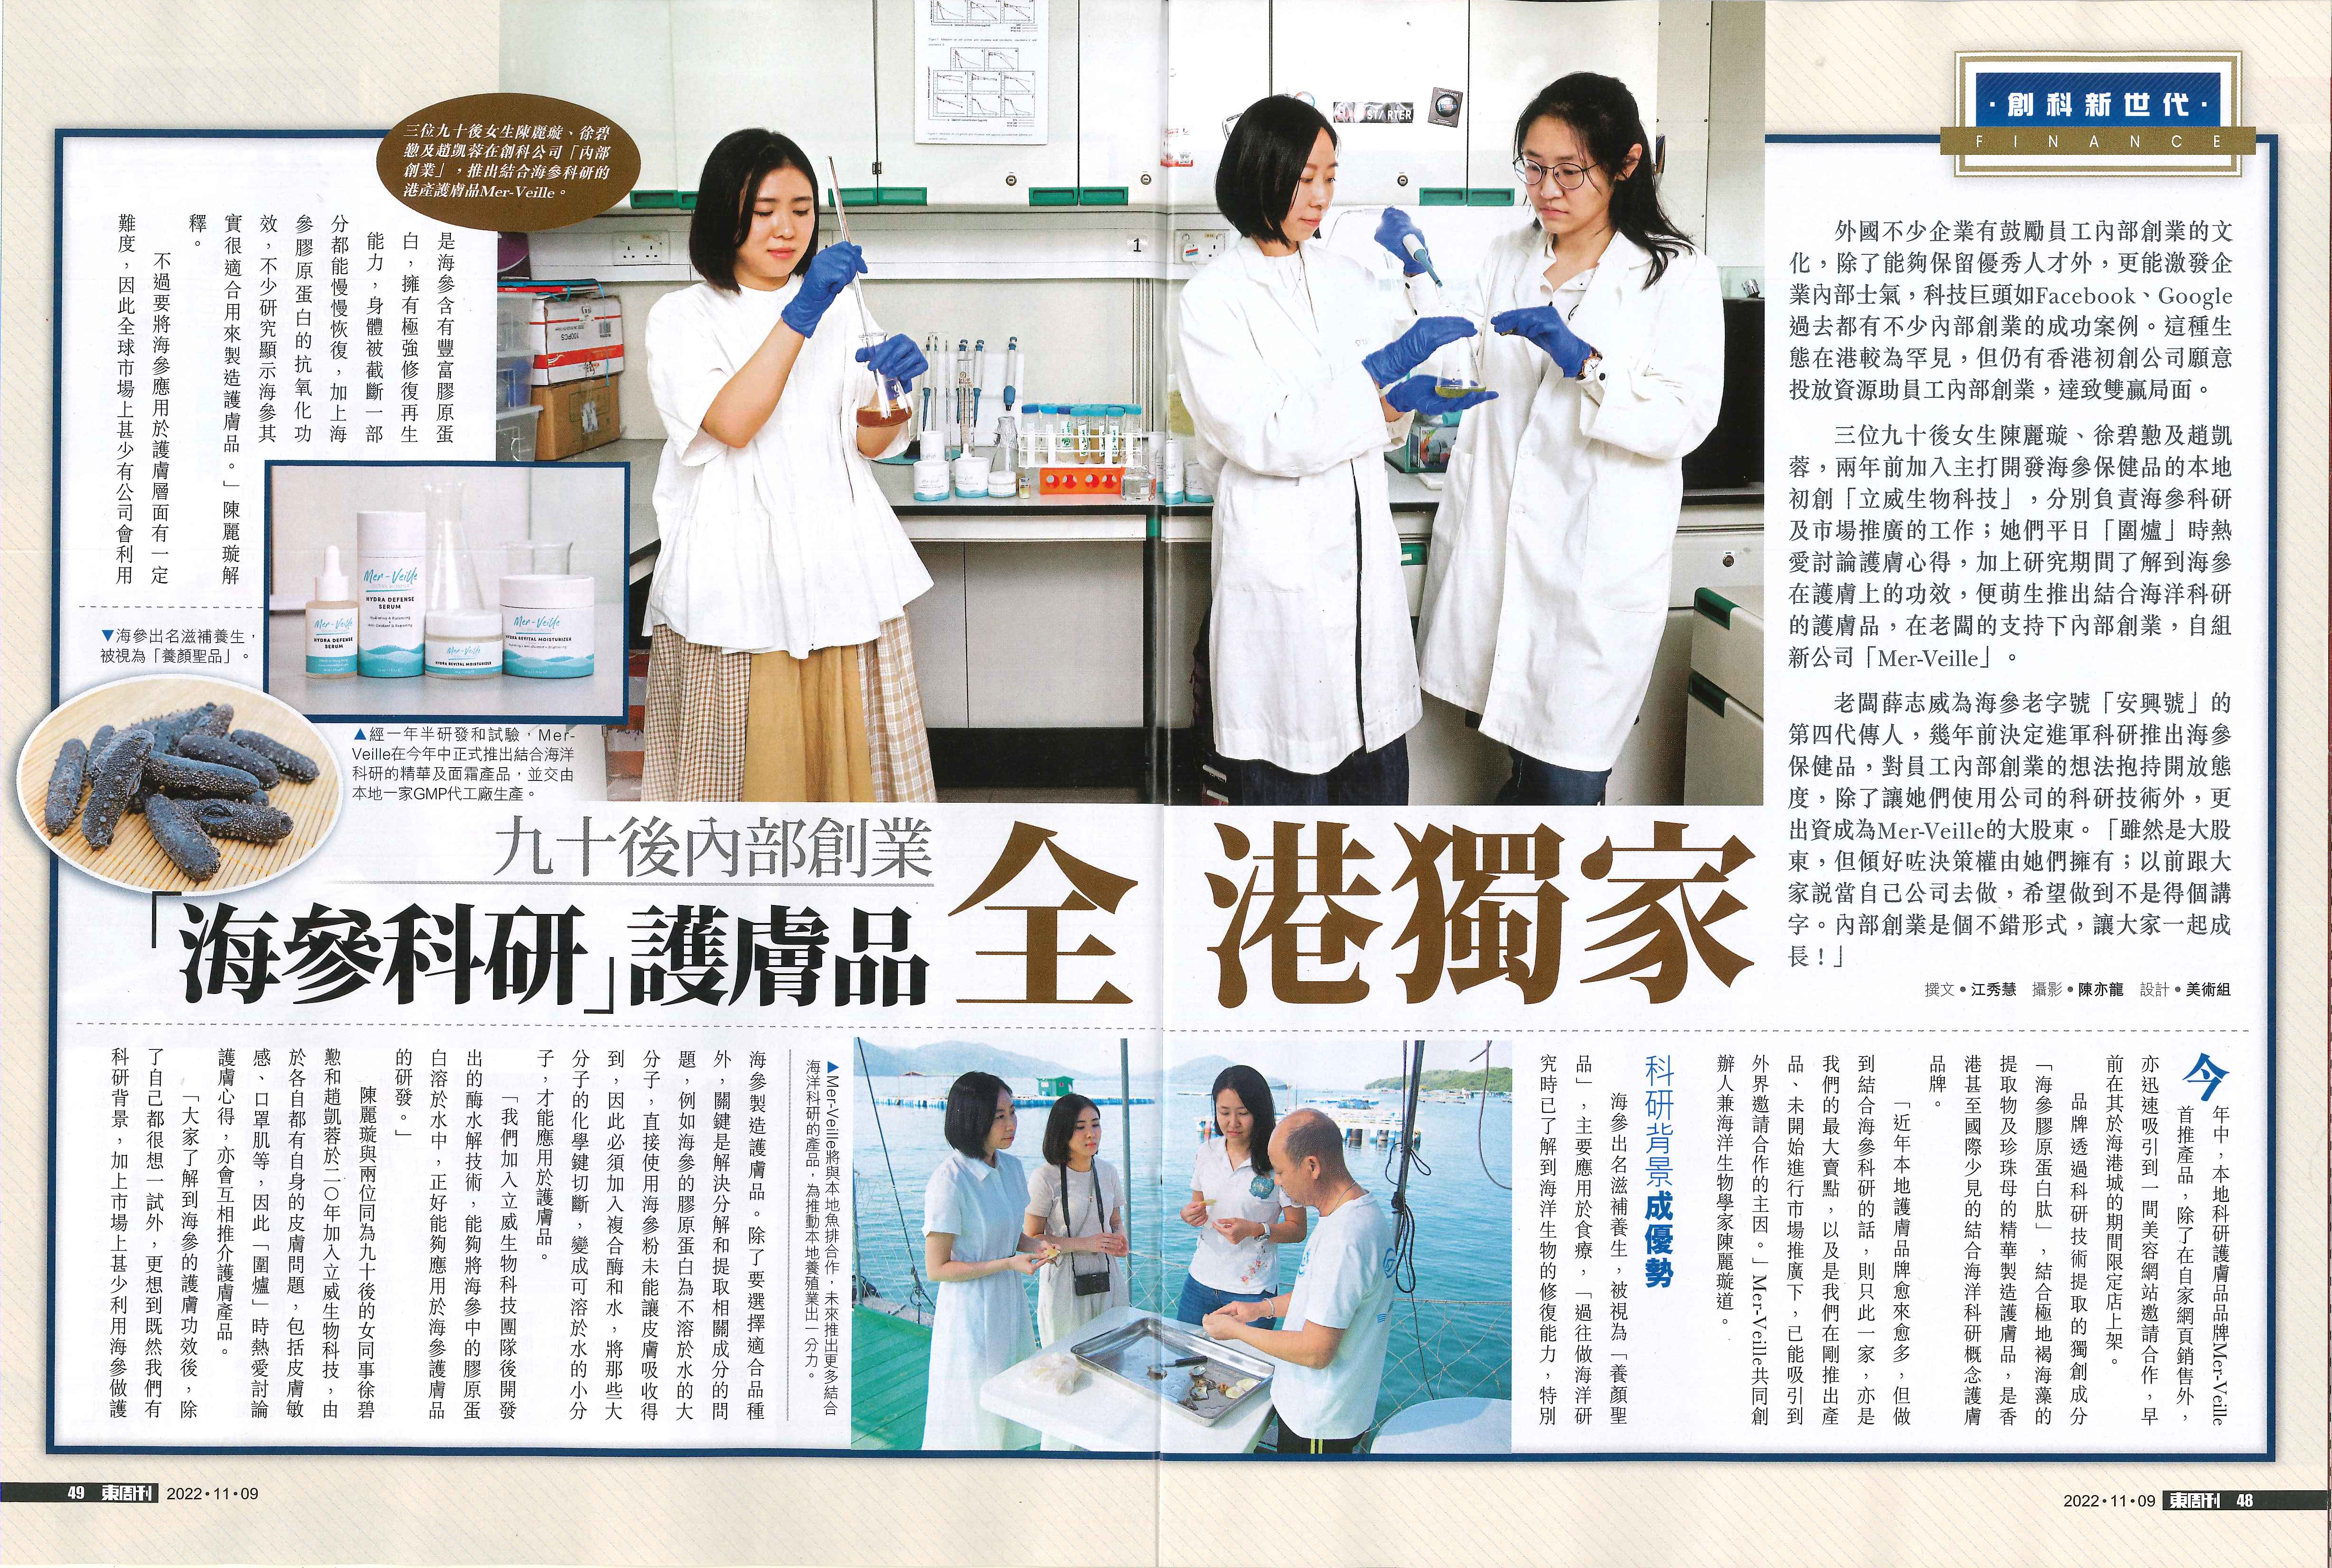 [Exclusive Interview with Eastweek] Post-90s Intrapreneurship "Sea Cucumber Research" Skin Care Products Exclusive in Hong Kong｜Mer-Veille Hong Kong